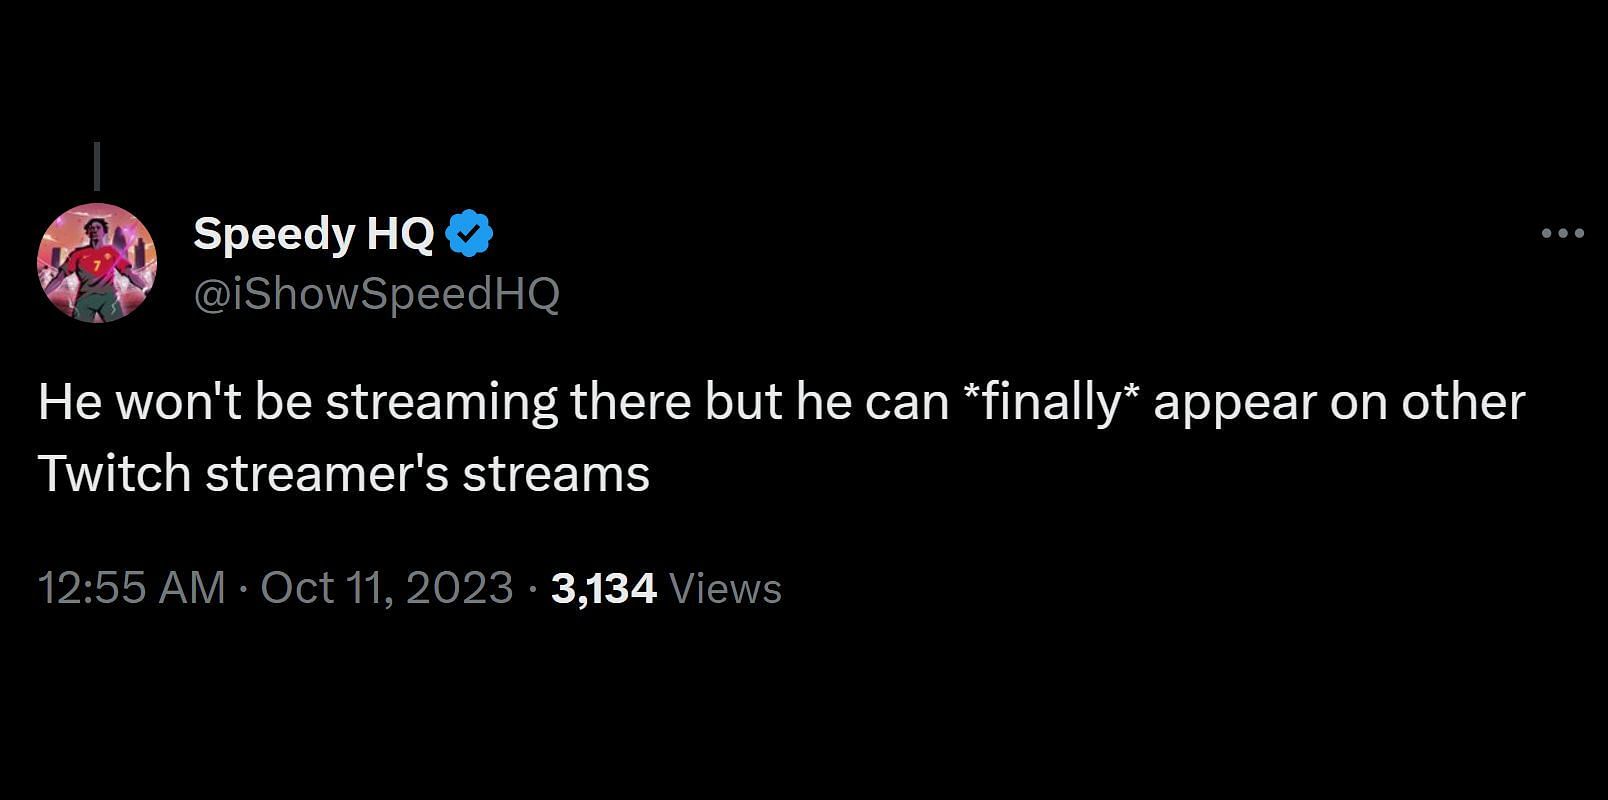 IShowSpeed gets 100k+ new Twitch followers without streaming after unban -  Dexerto